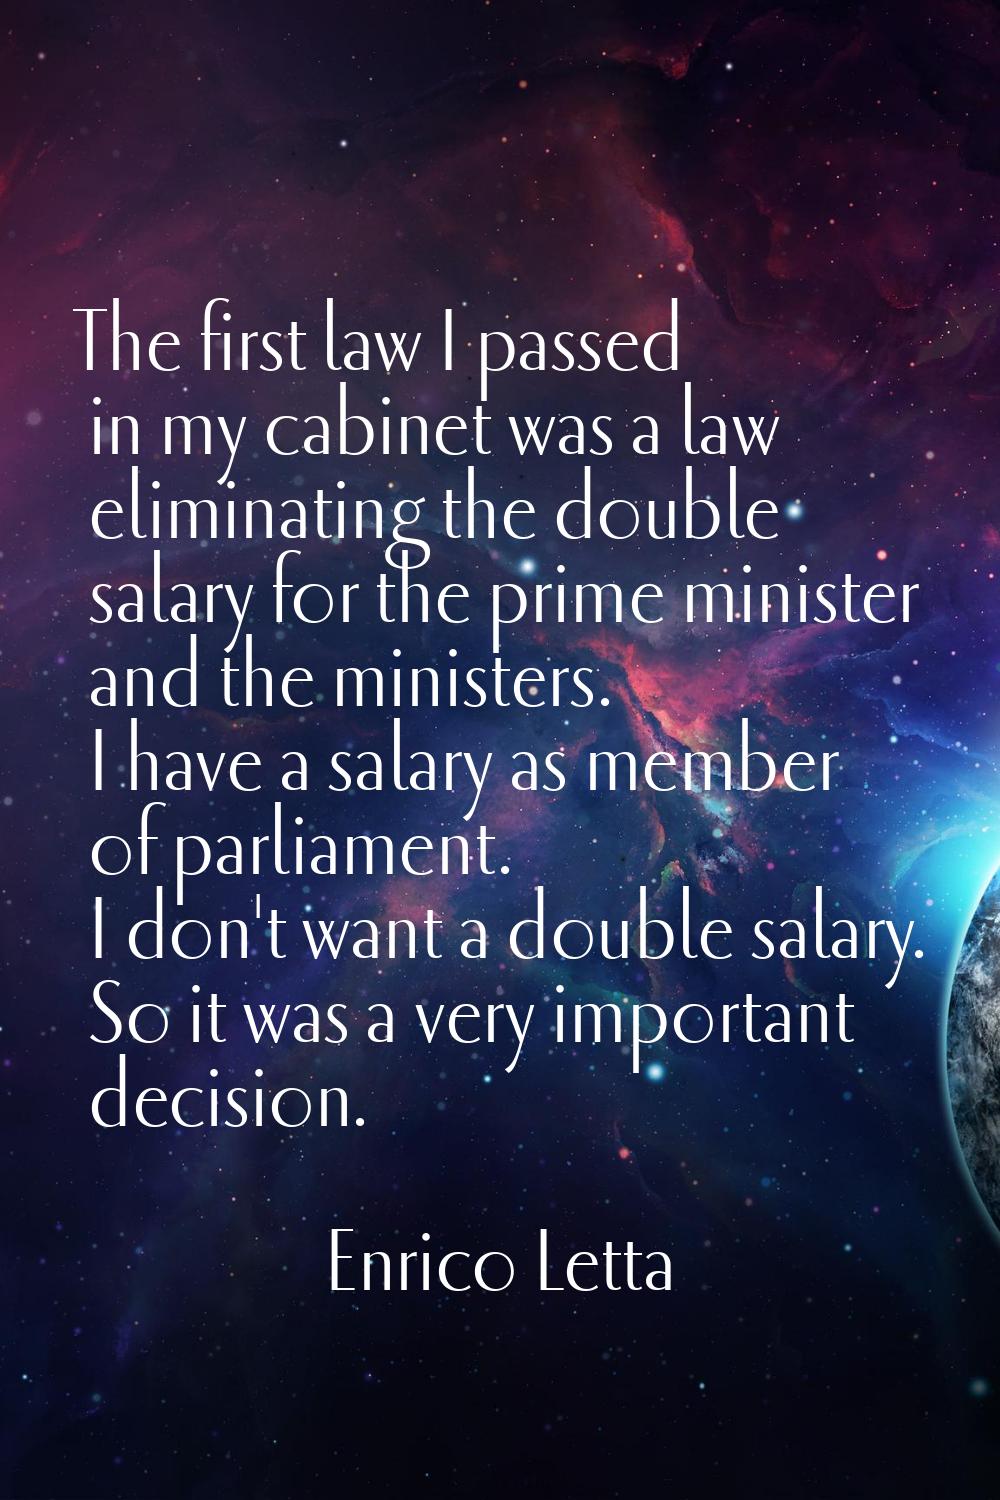 The first law I passed in my cabinet was a law eliminating the double salary for the prime minister